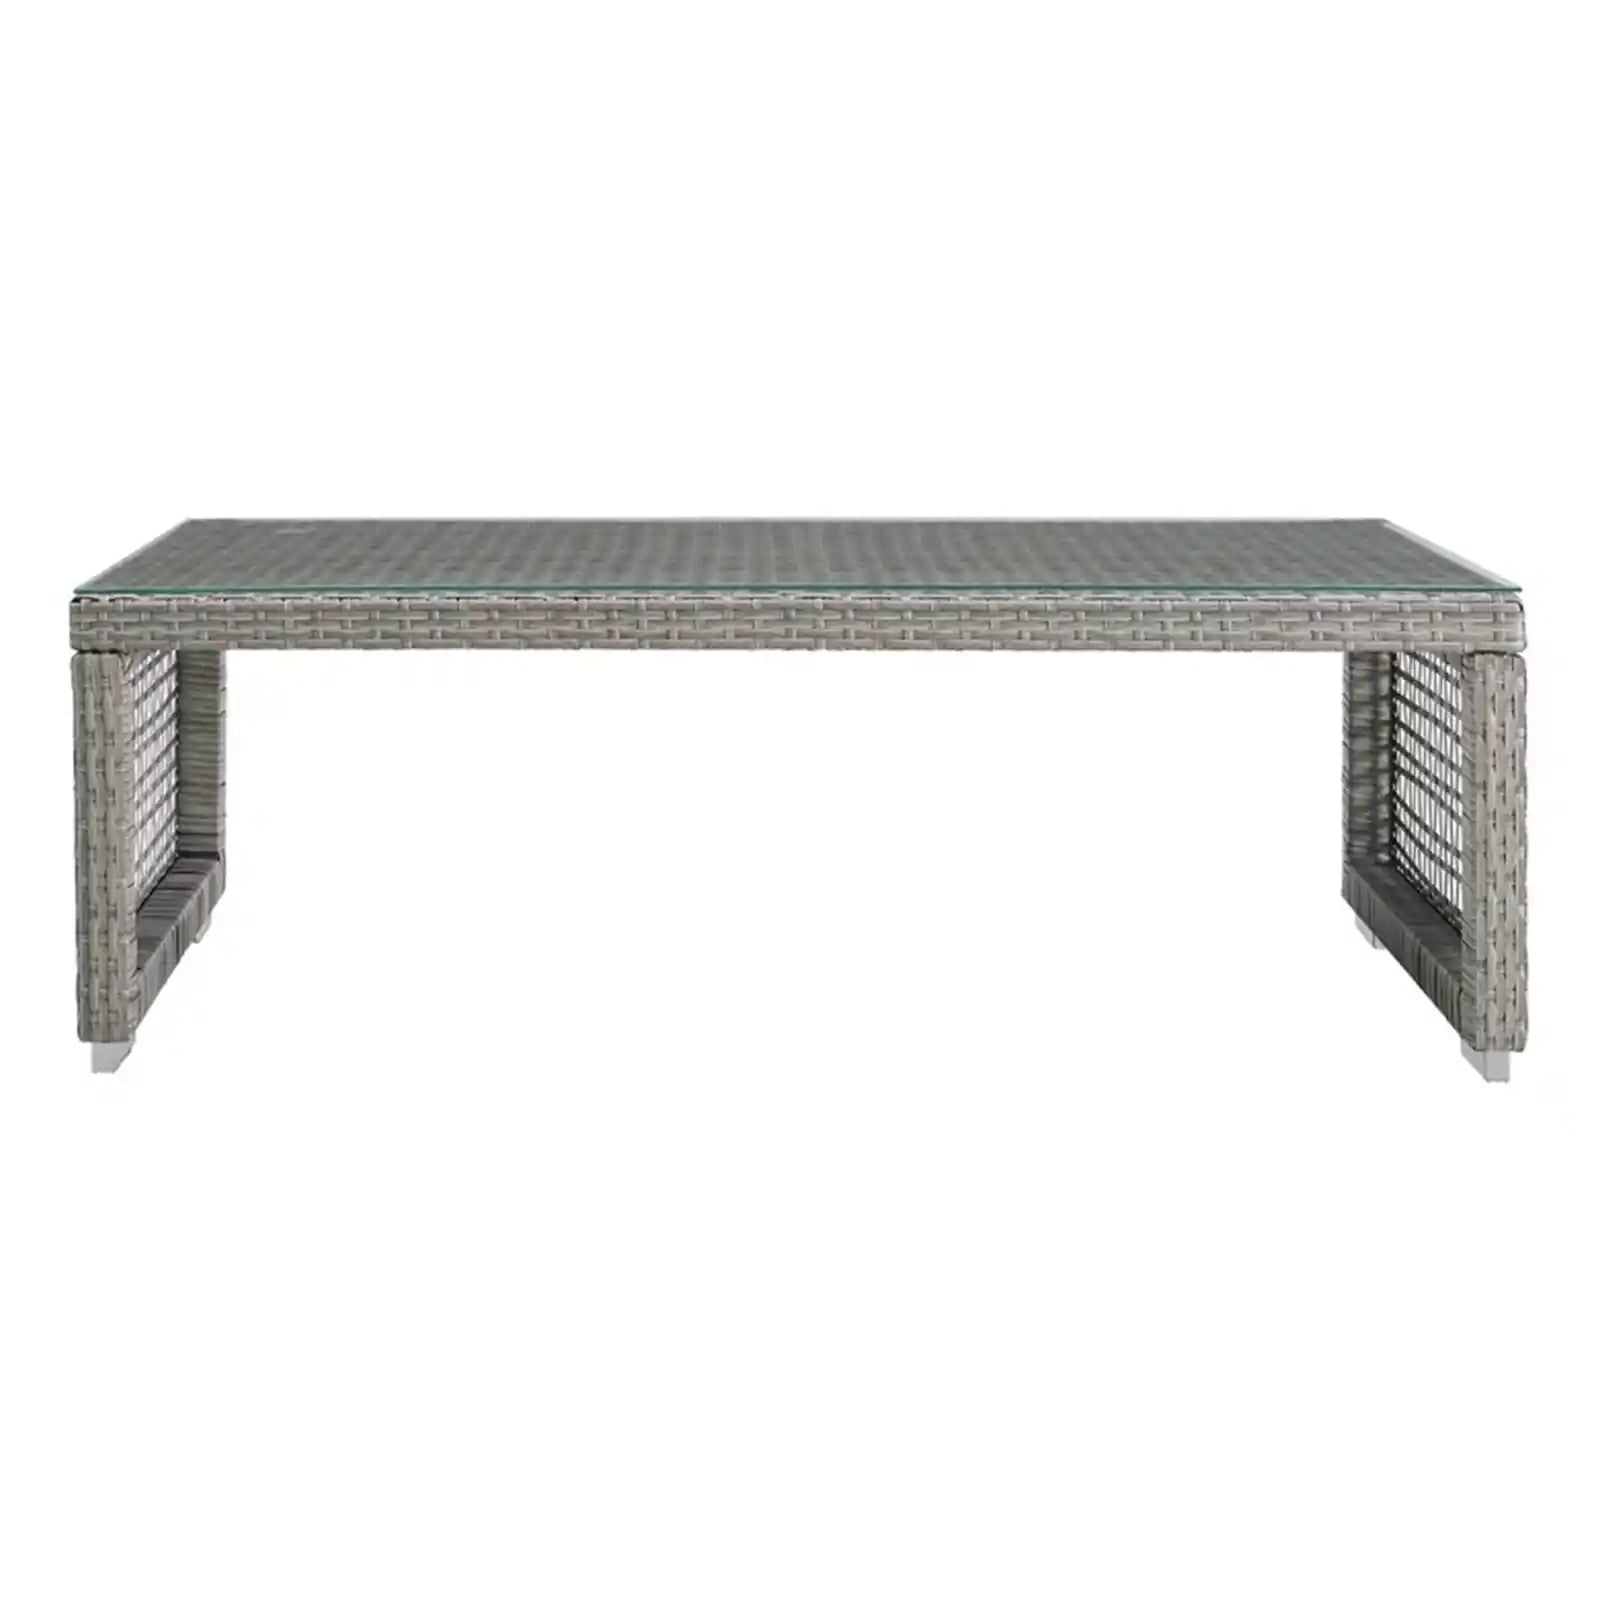 Rattan Outdoor Patio Coffee Table in Gray